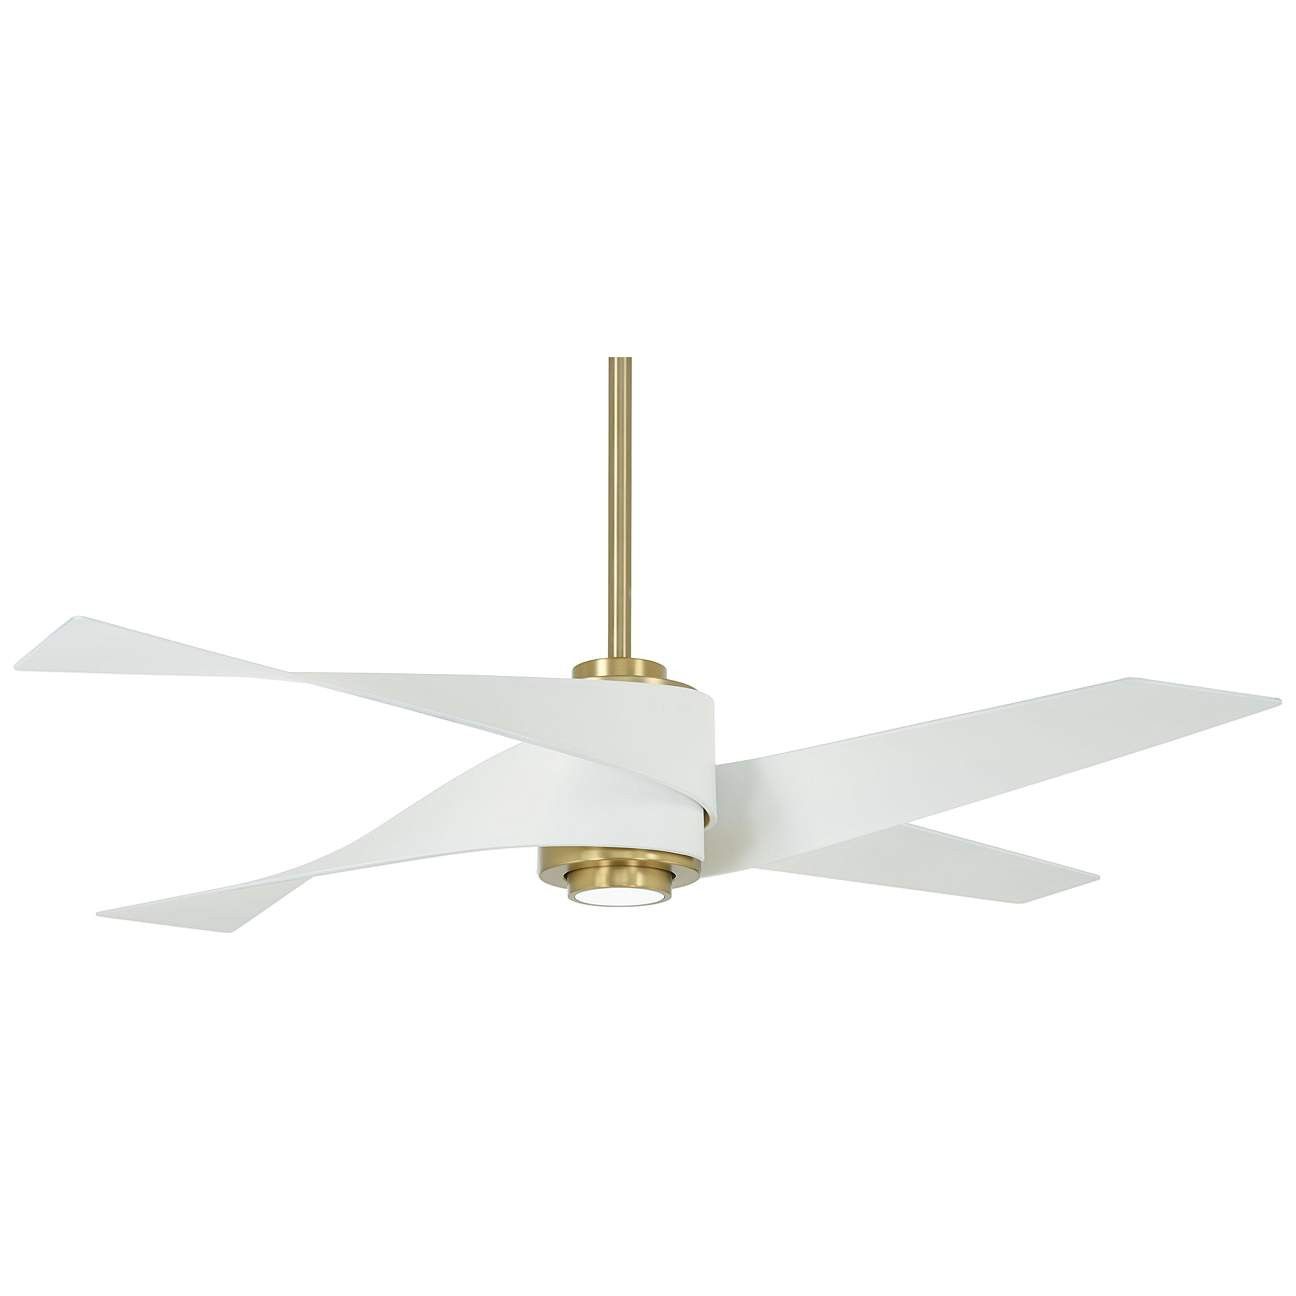 64" Minka Aire Artemis IV Brass and White LED Ceiling Fan with Remote | Lamps Plus